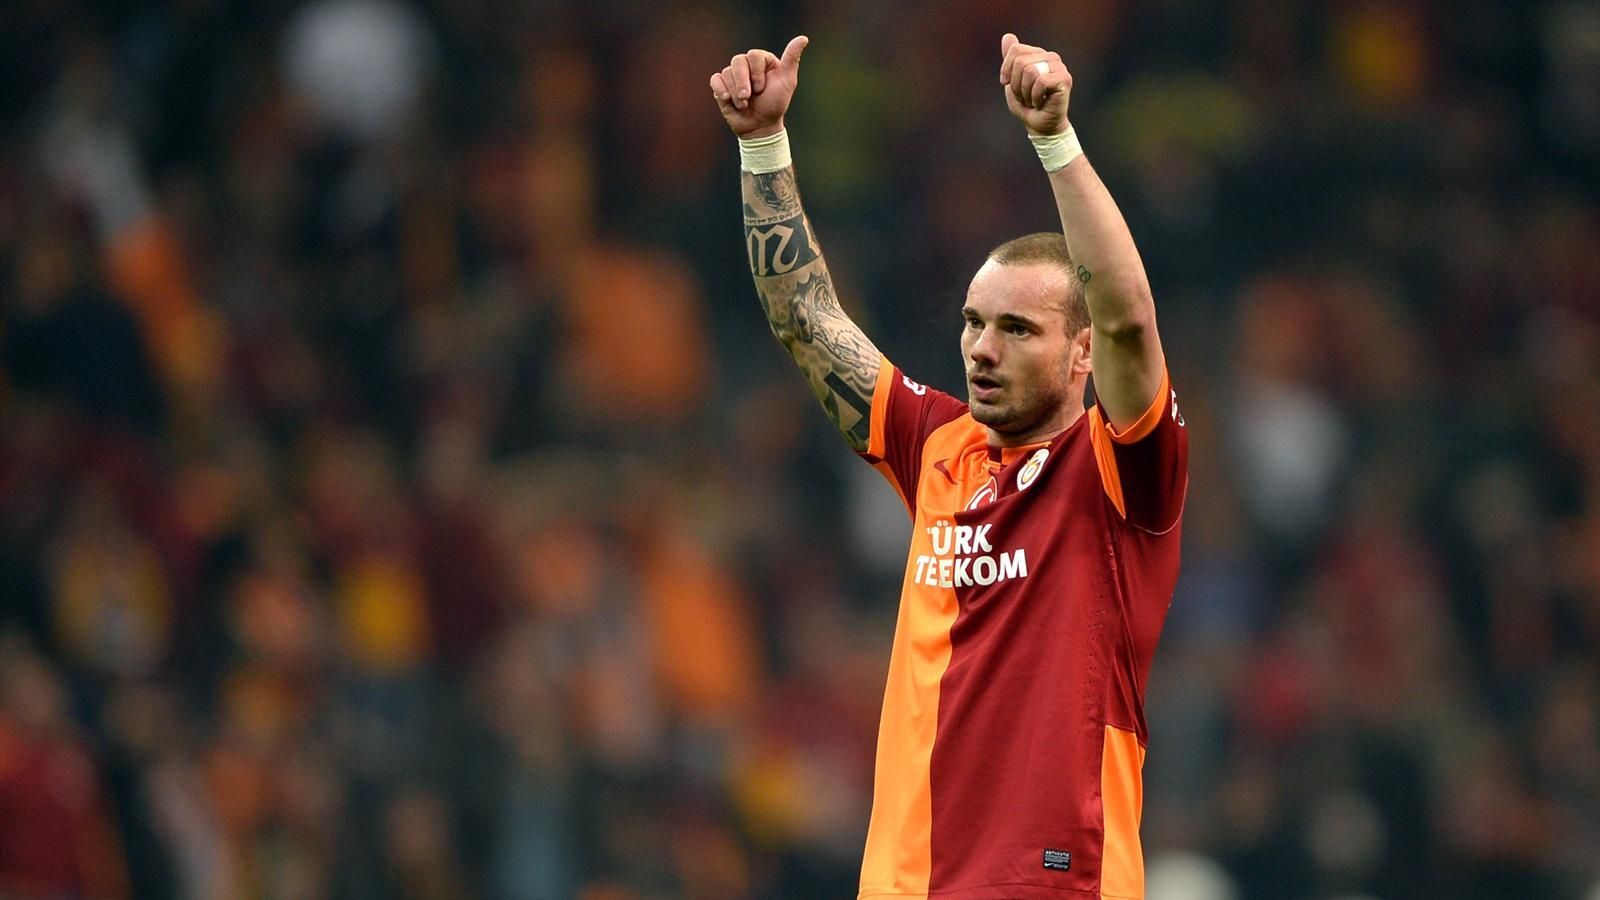 Wesley Sneijder Is Trying to Lose Weight to Return to Utrecht